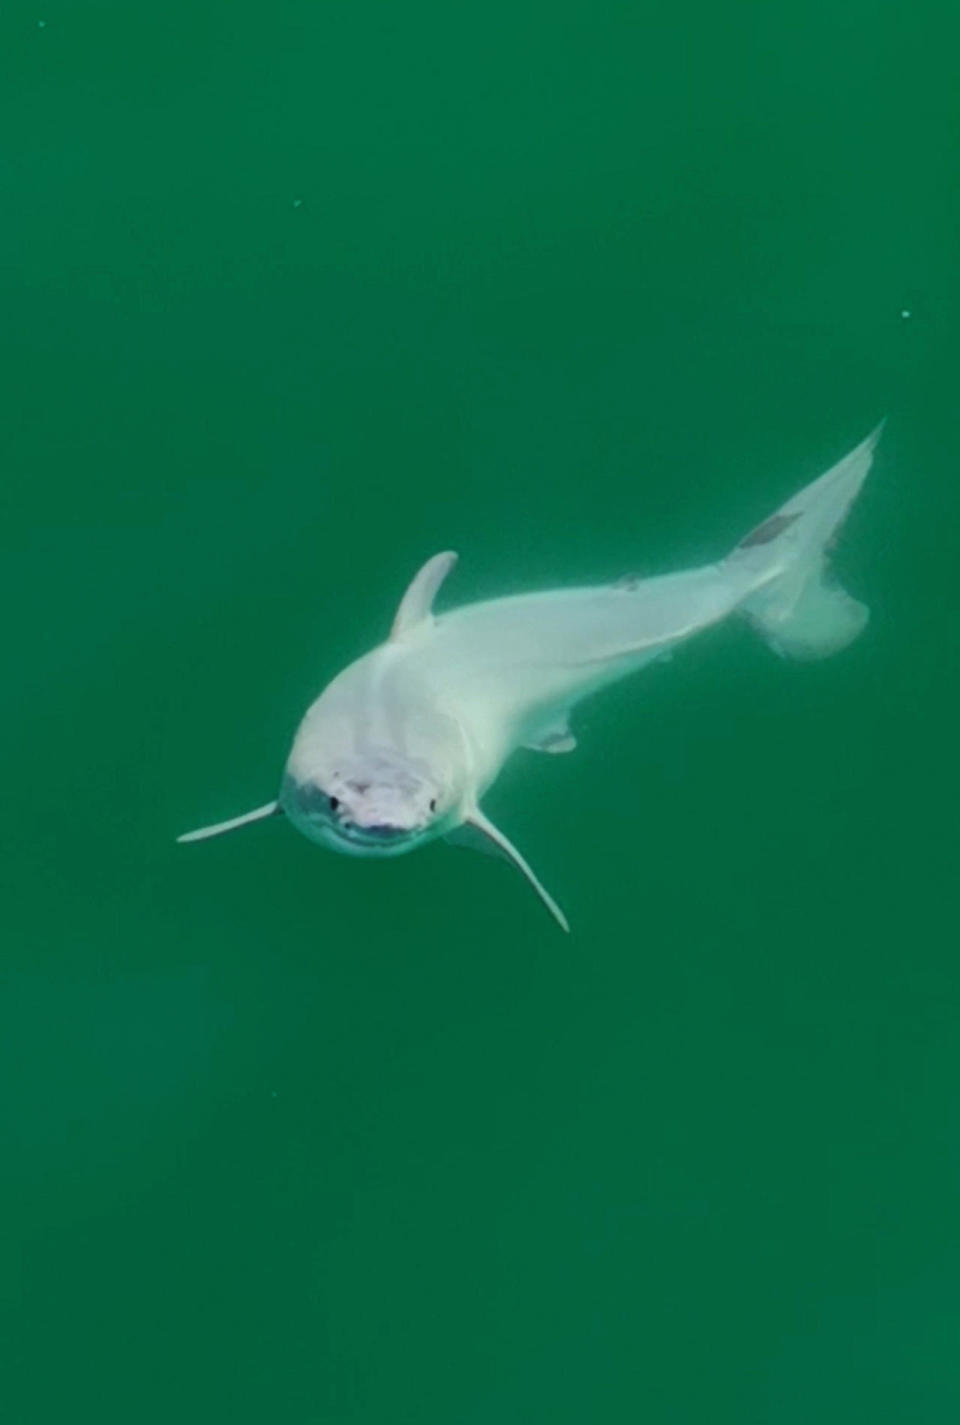 A longtime wildlife photographer captured a drone image of what's believed to be the first-ever sighting of a live newborn great white shark.  / Credit: Carlos Gauna/ @TheMalibuArtist